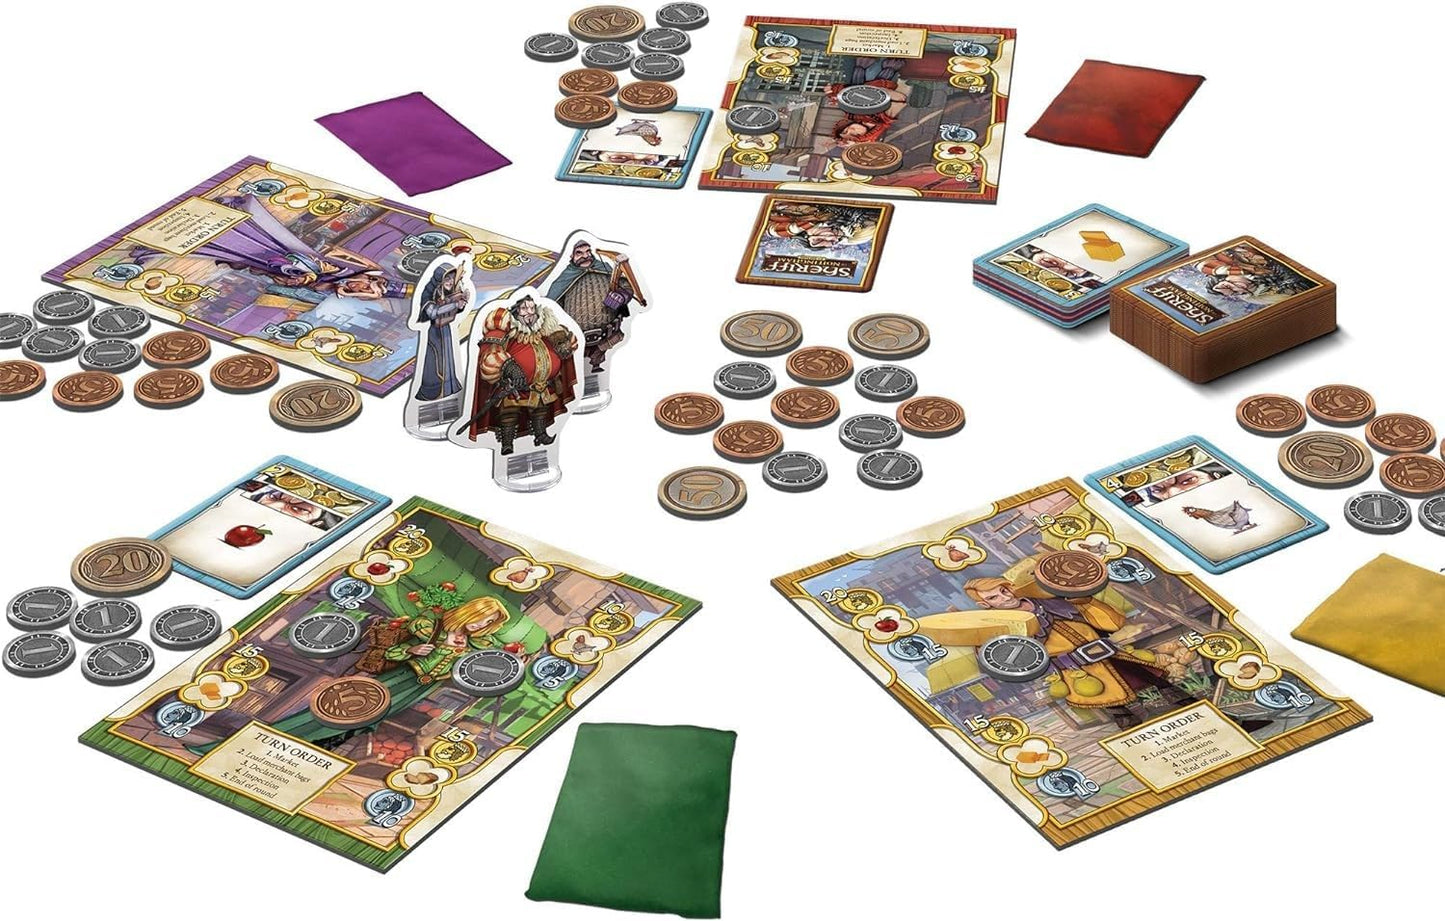 Sheriff of Nottingham 2nd Edition CMON Games. Sold by Board Hoarders